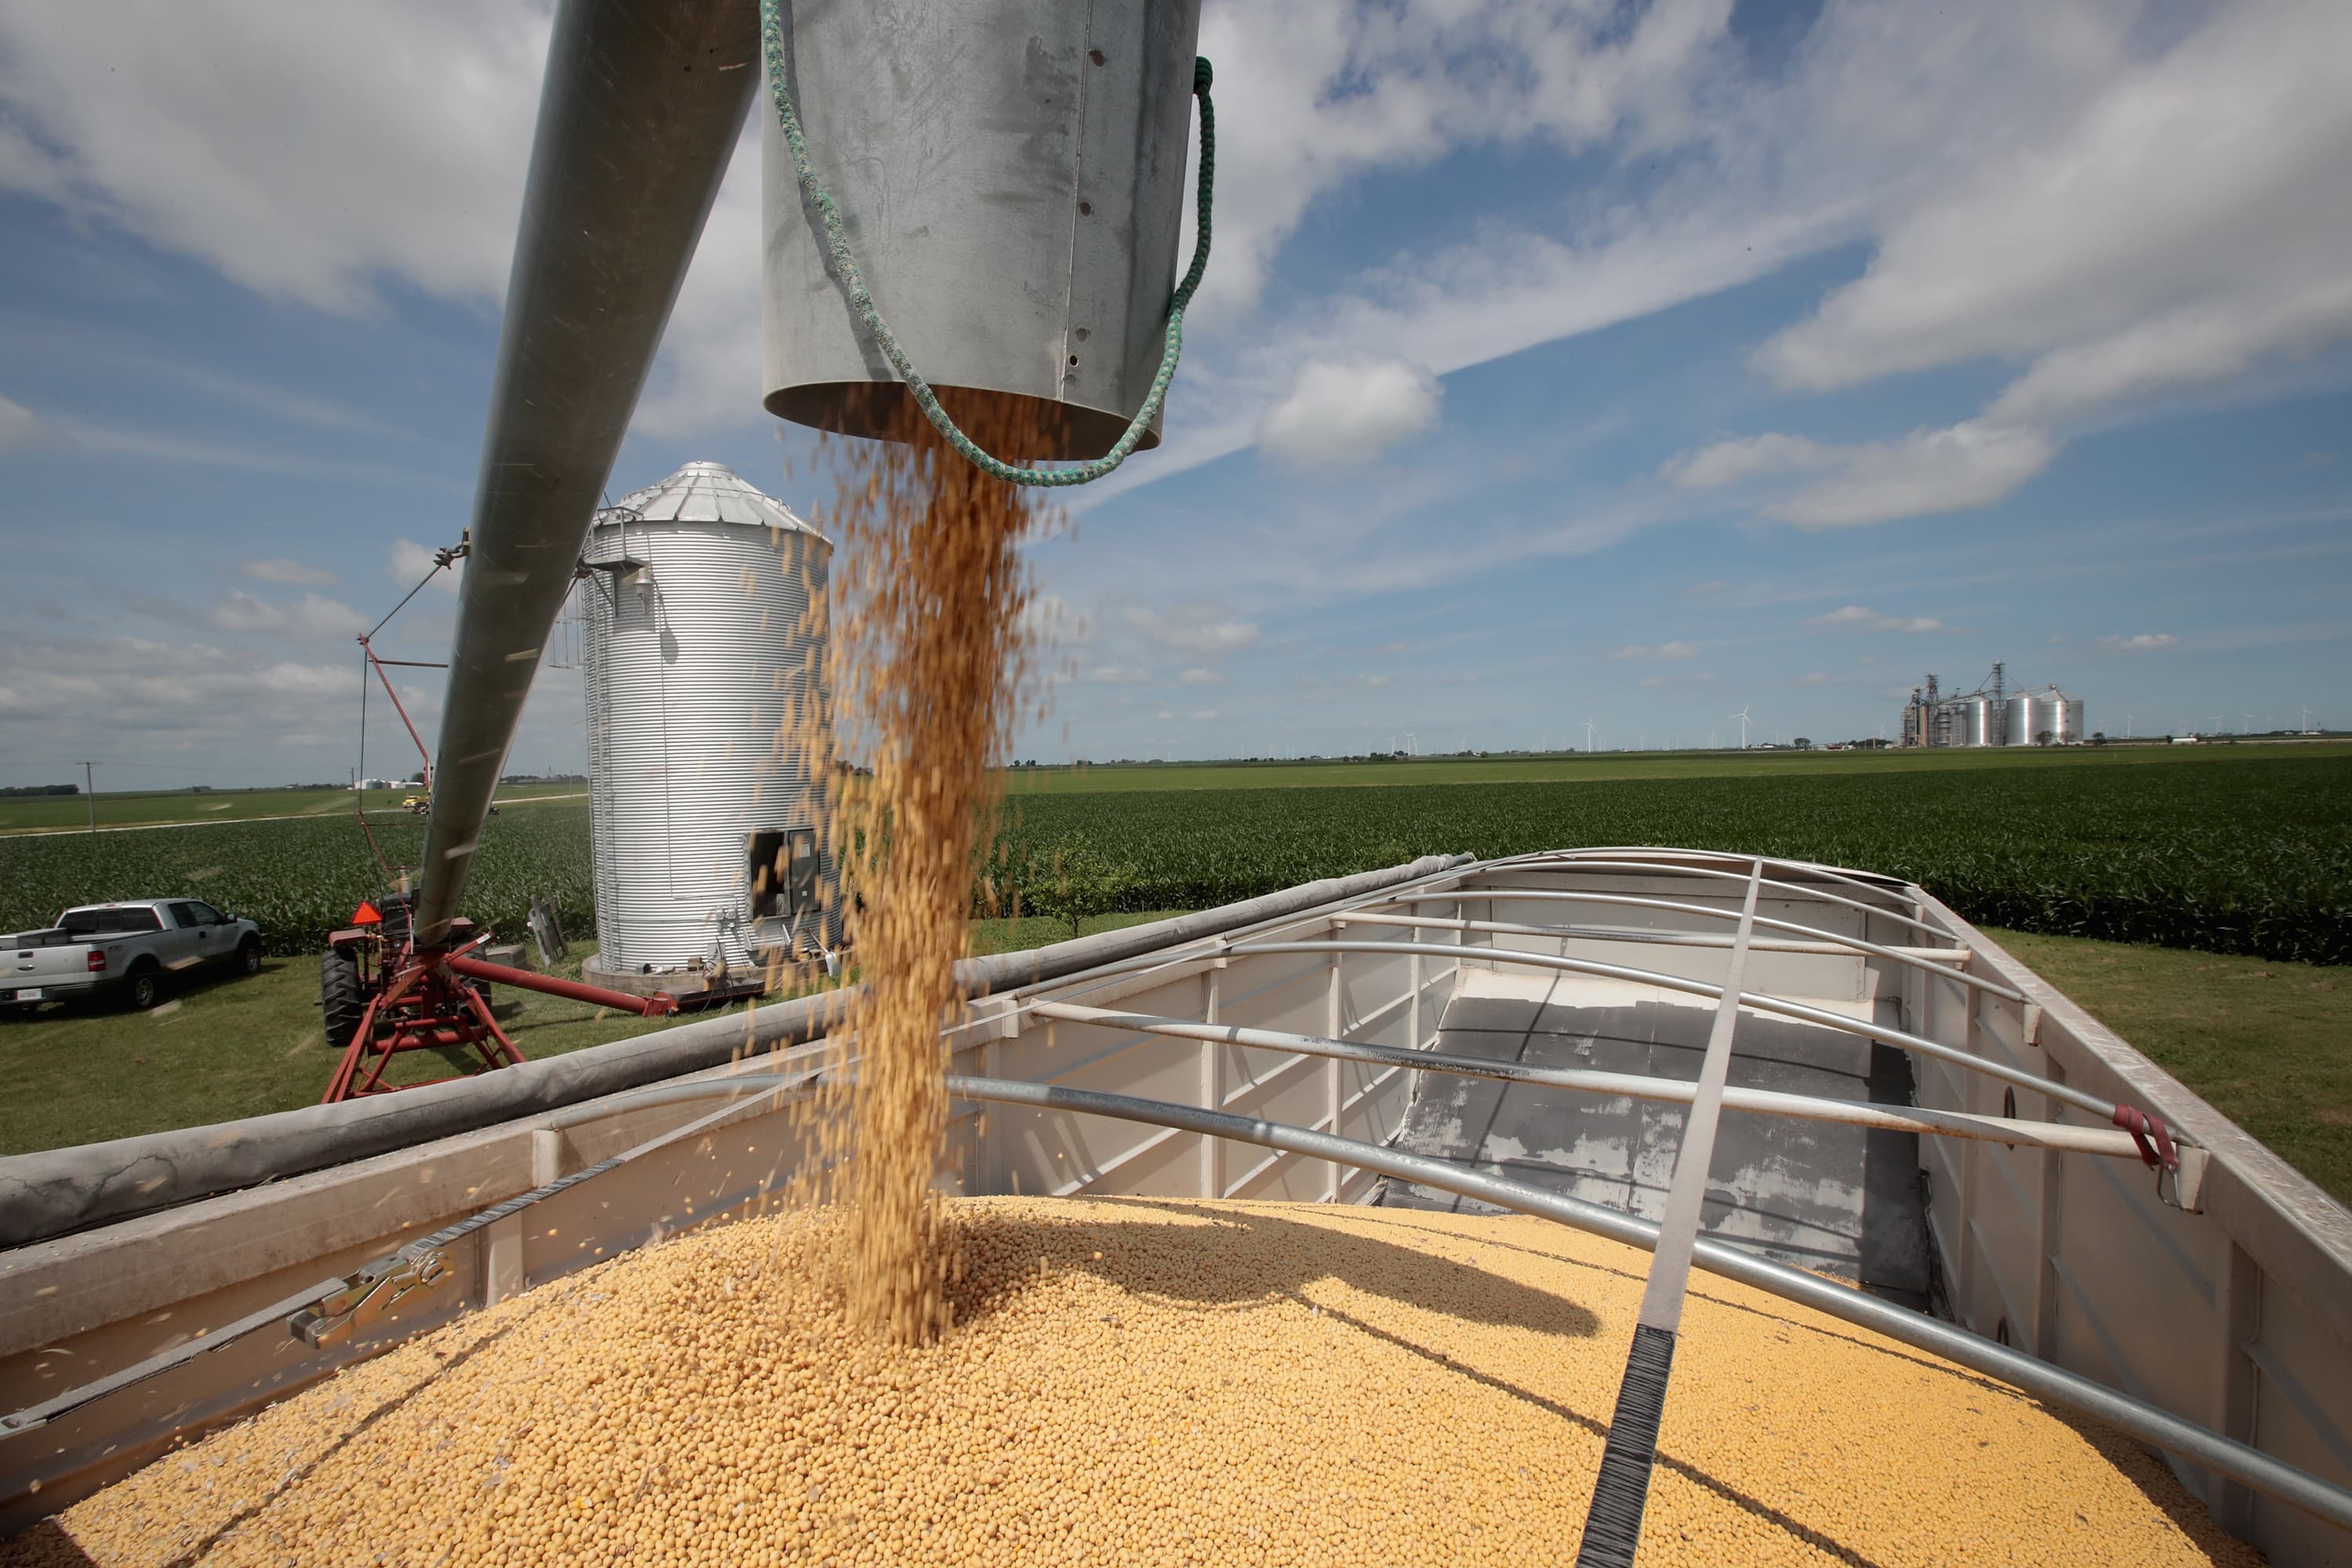 China may be using weak soybean demand and adequate supply as an opportunity to halt U.S. imports - CNBC